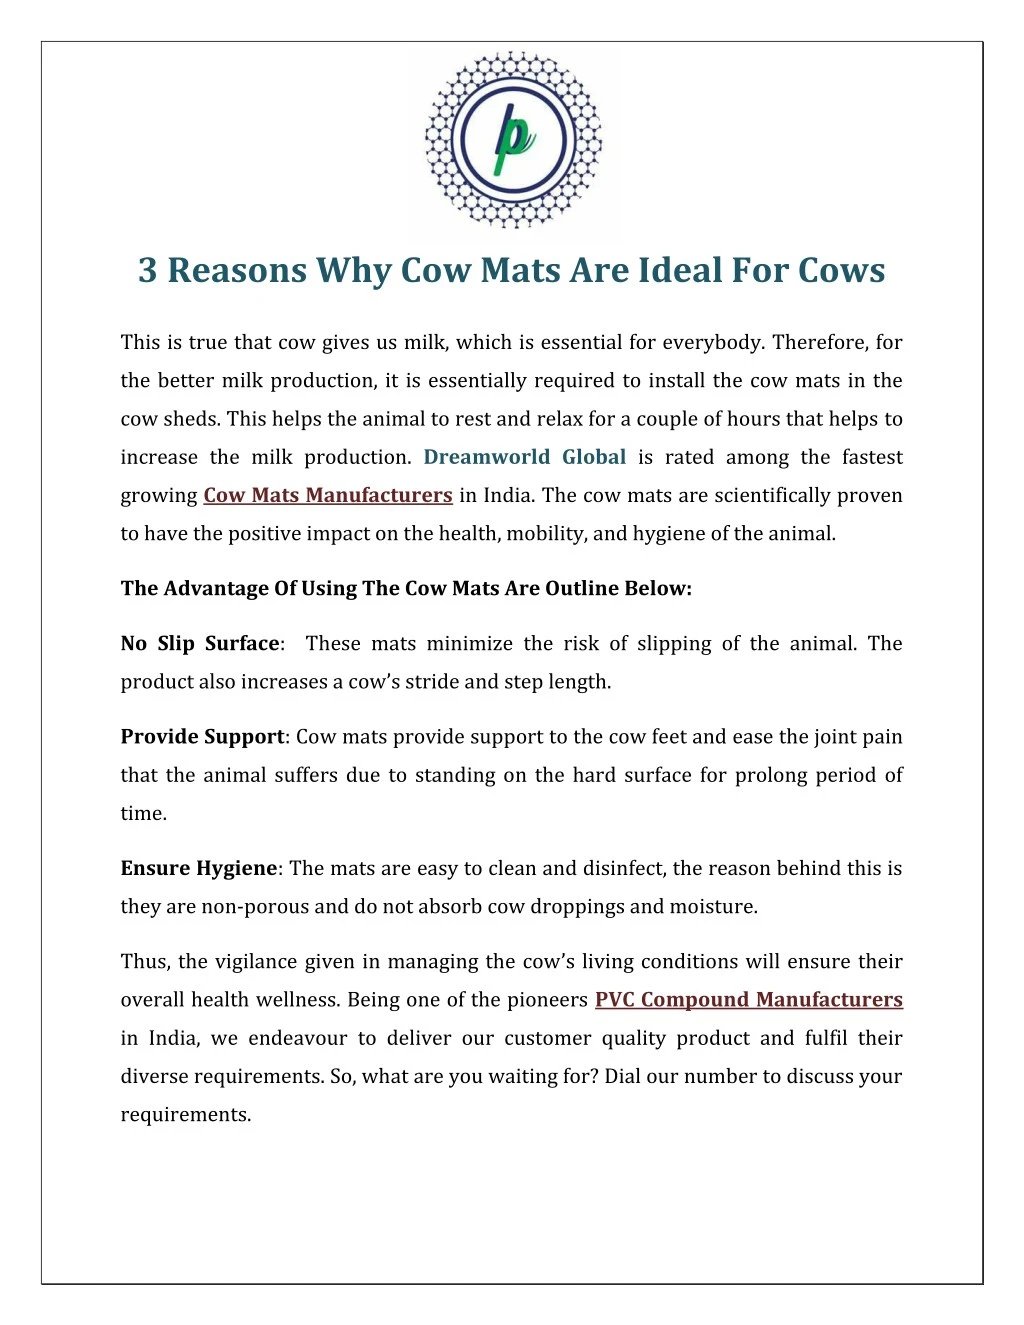 3 reasons why cow mats are ideal for cows